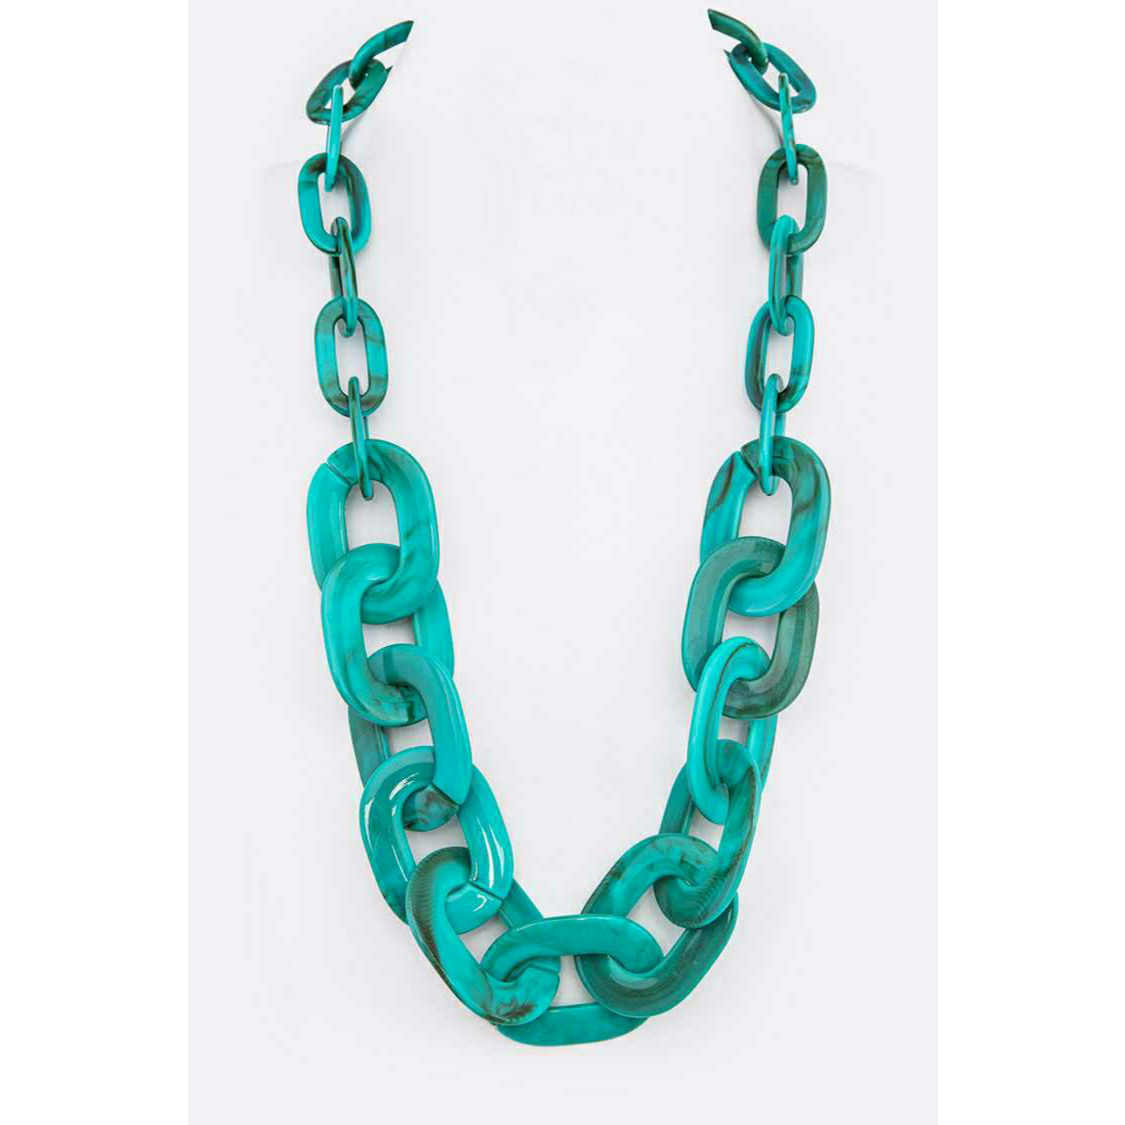 Resin Chain Link Necklace - Turquoise